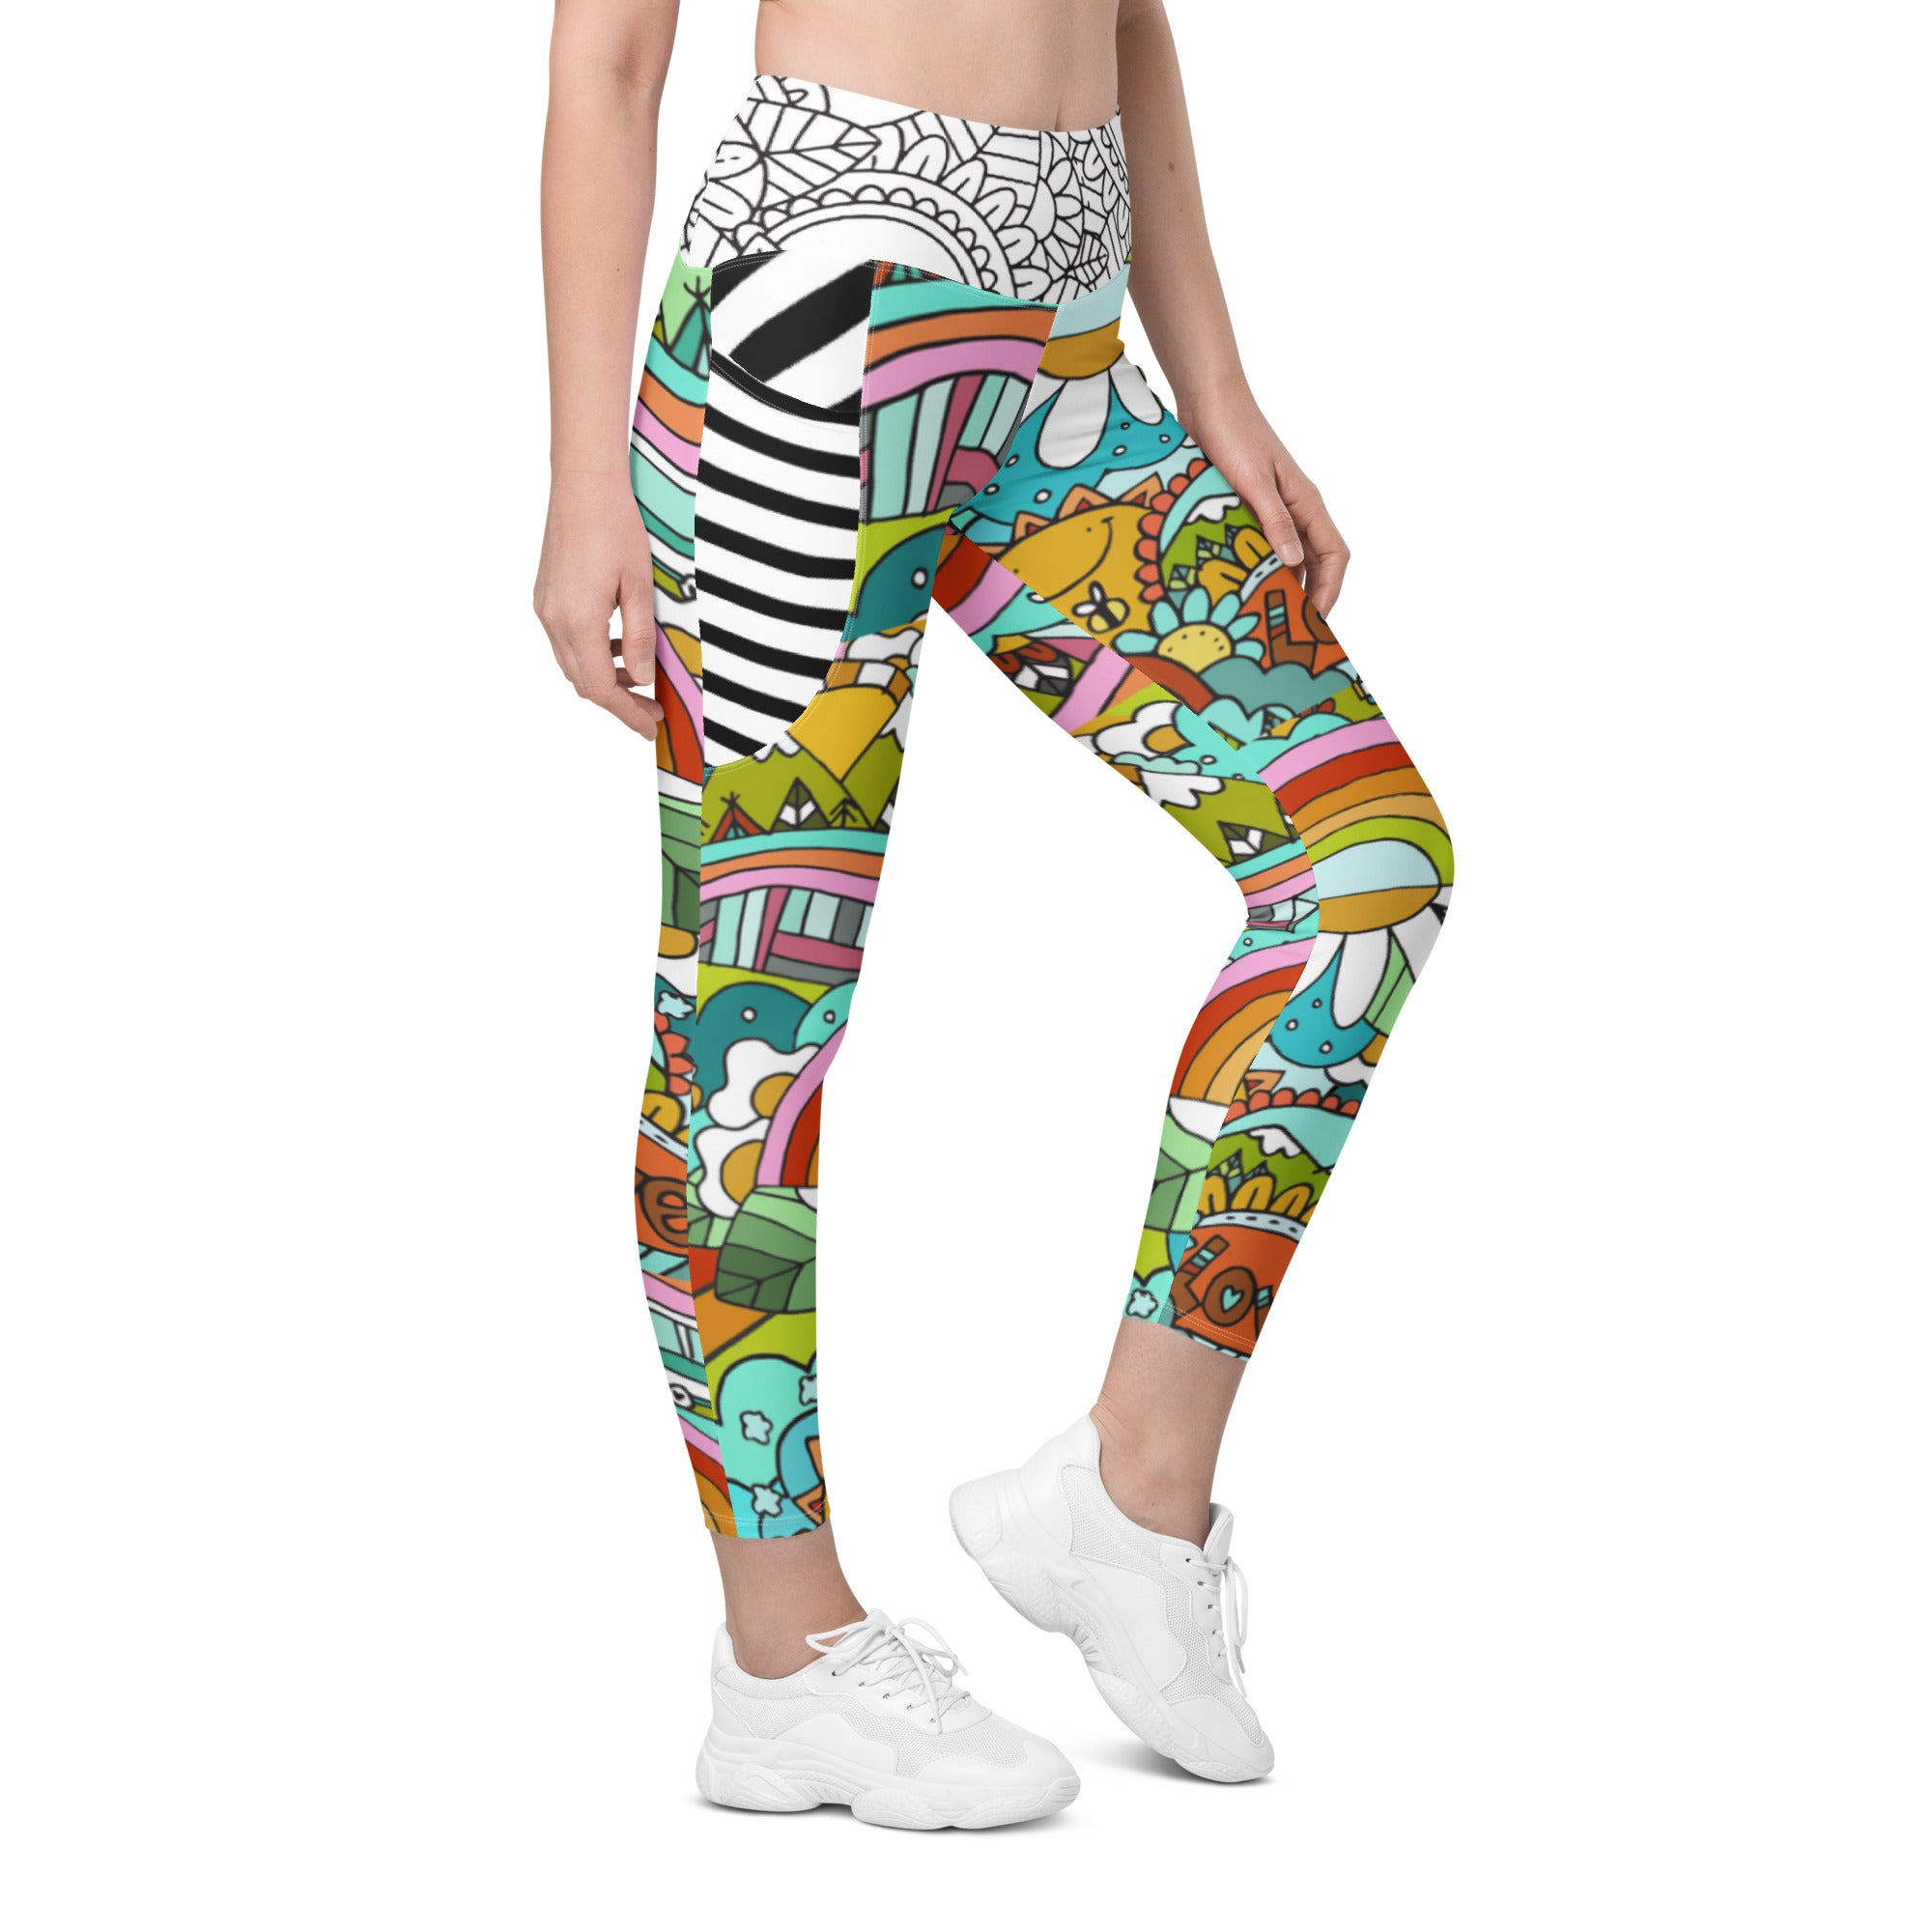 Love Today Leggings with pockets - Stay Sunny Goods